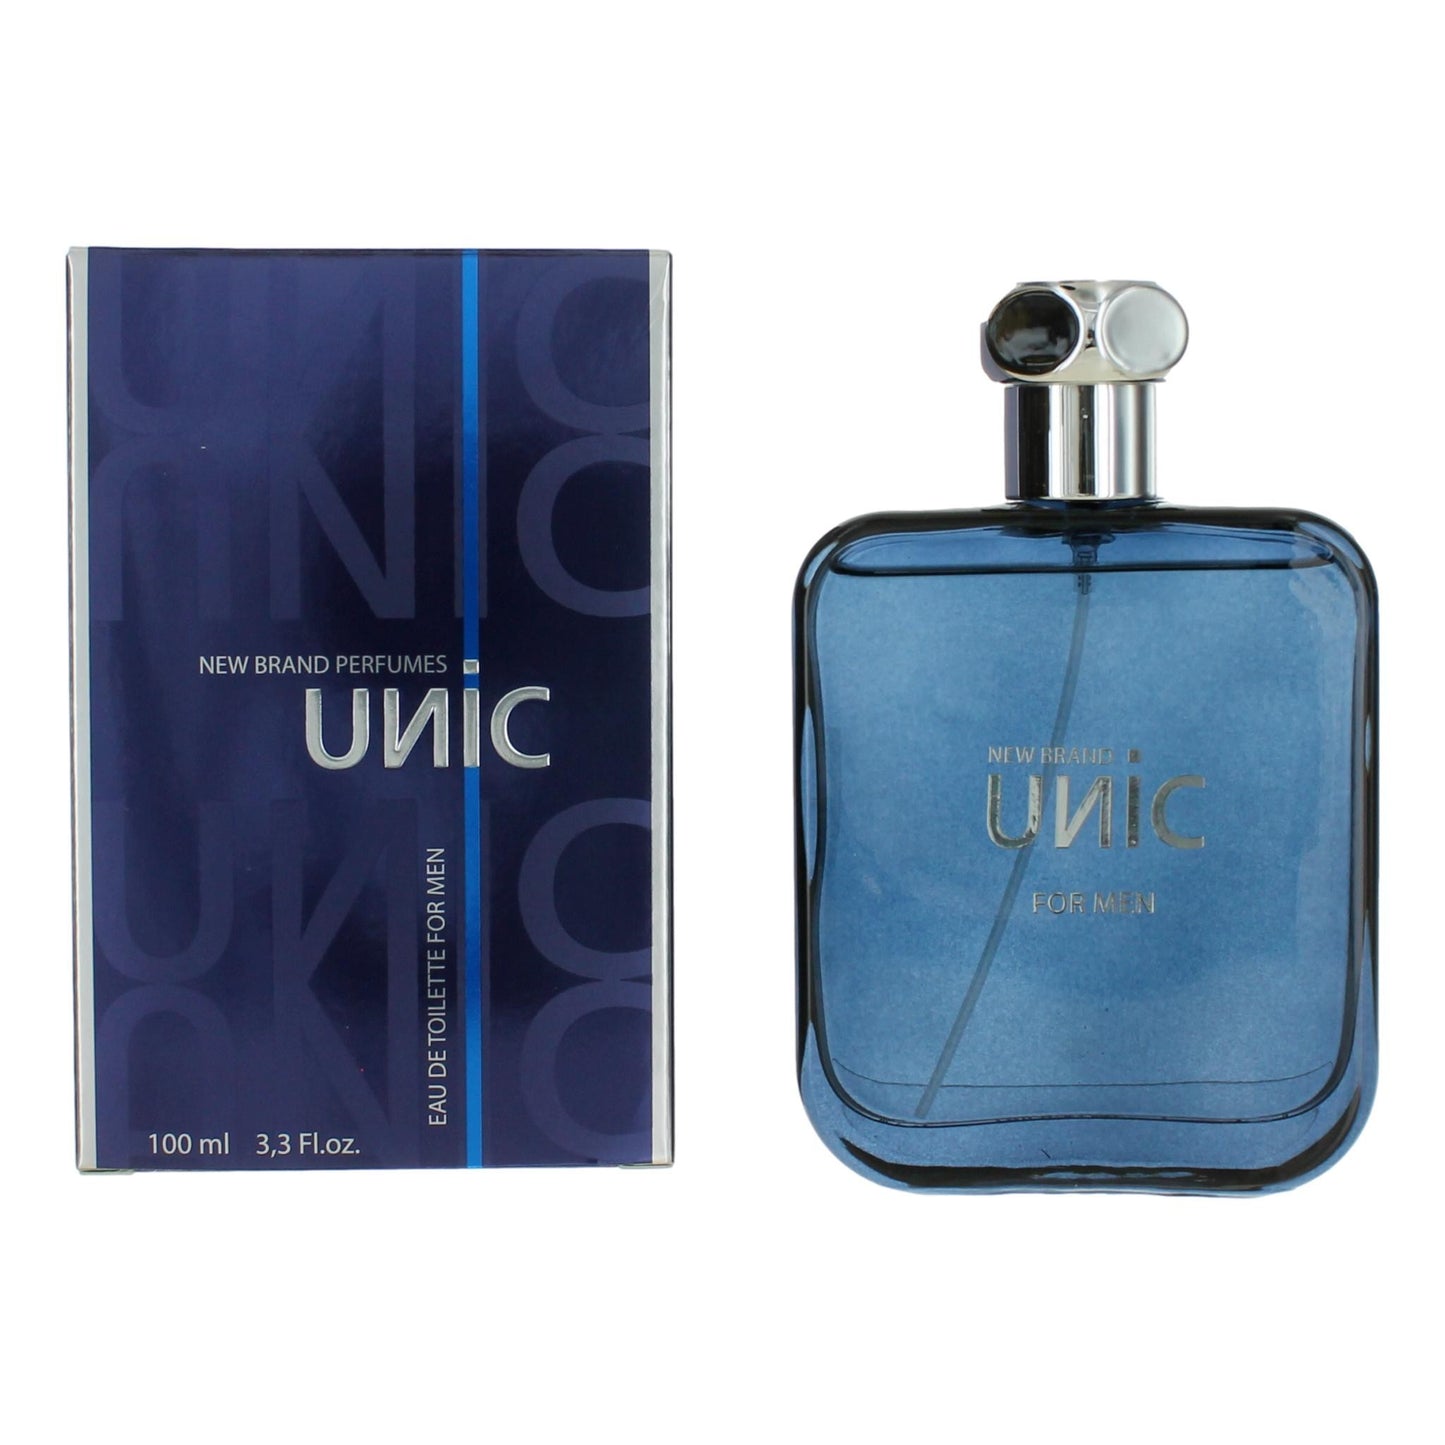 Unic by New Brand